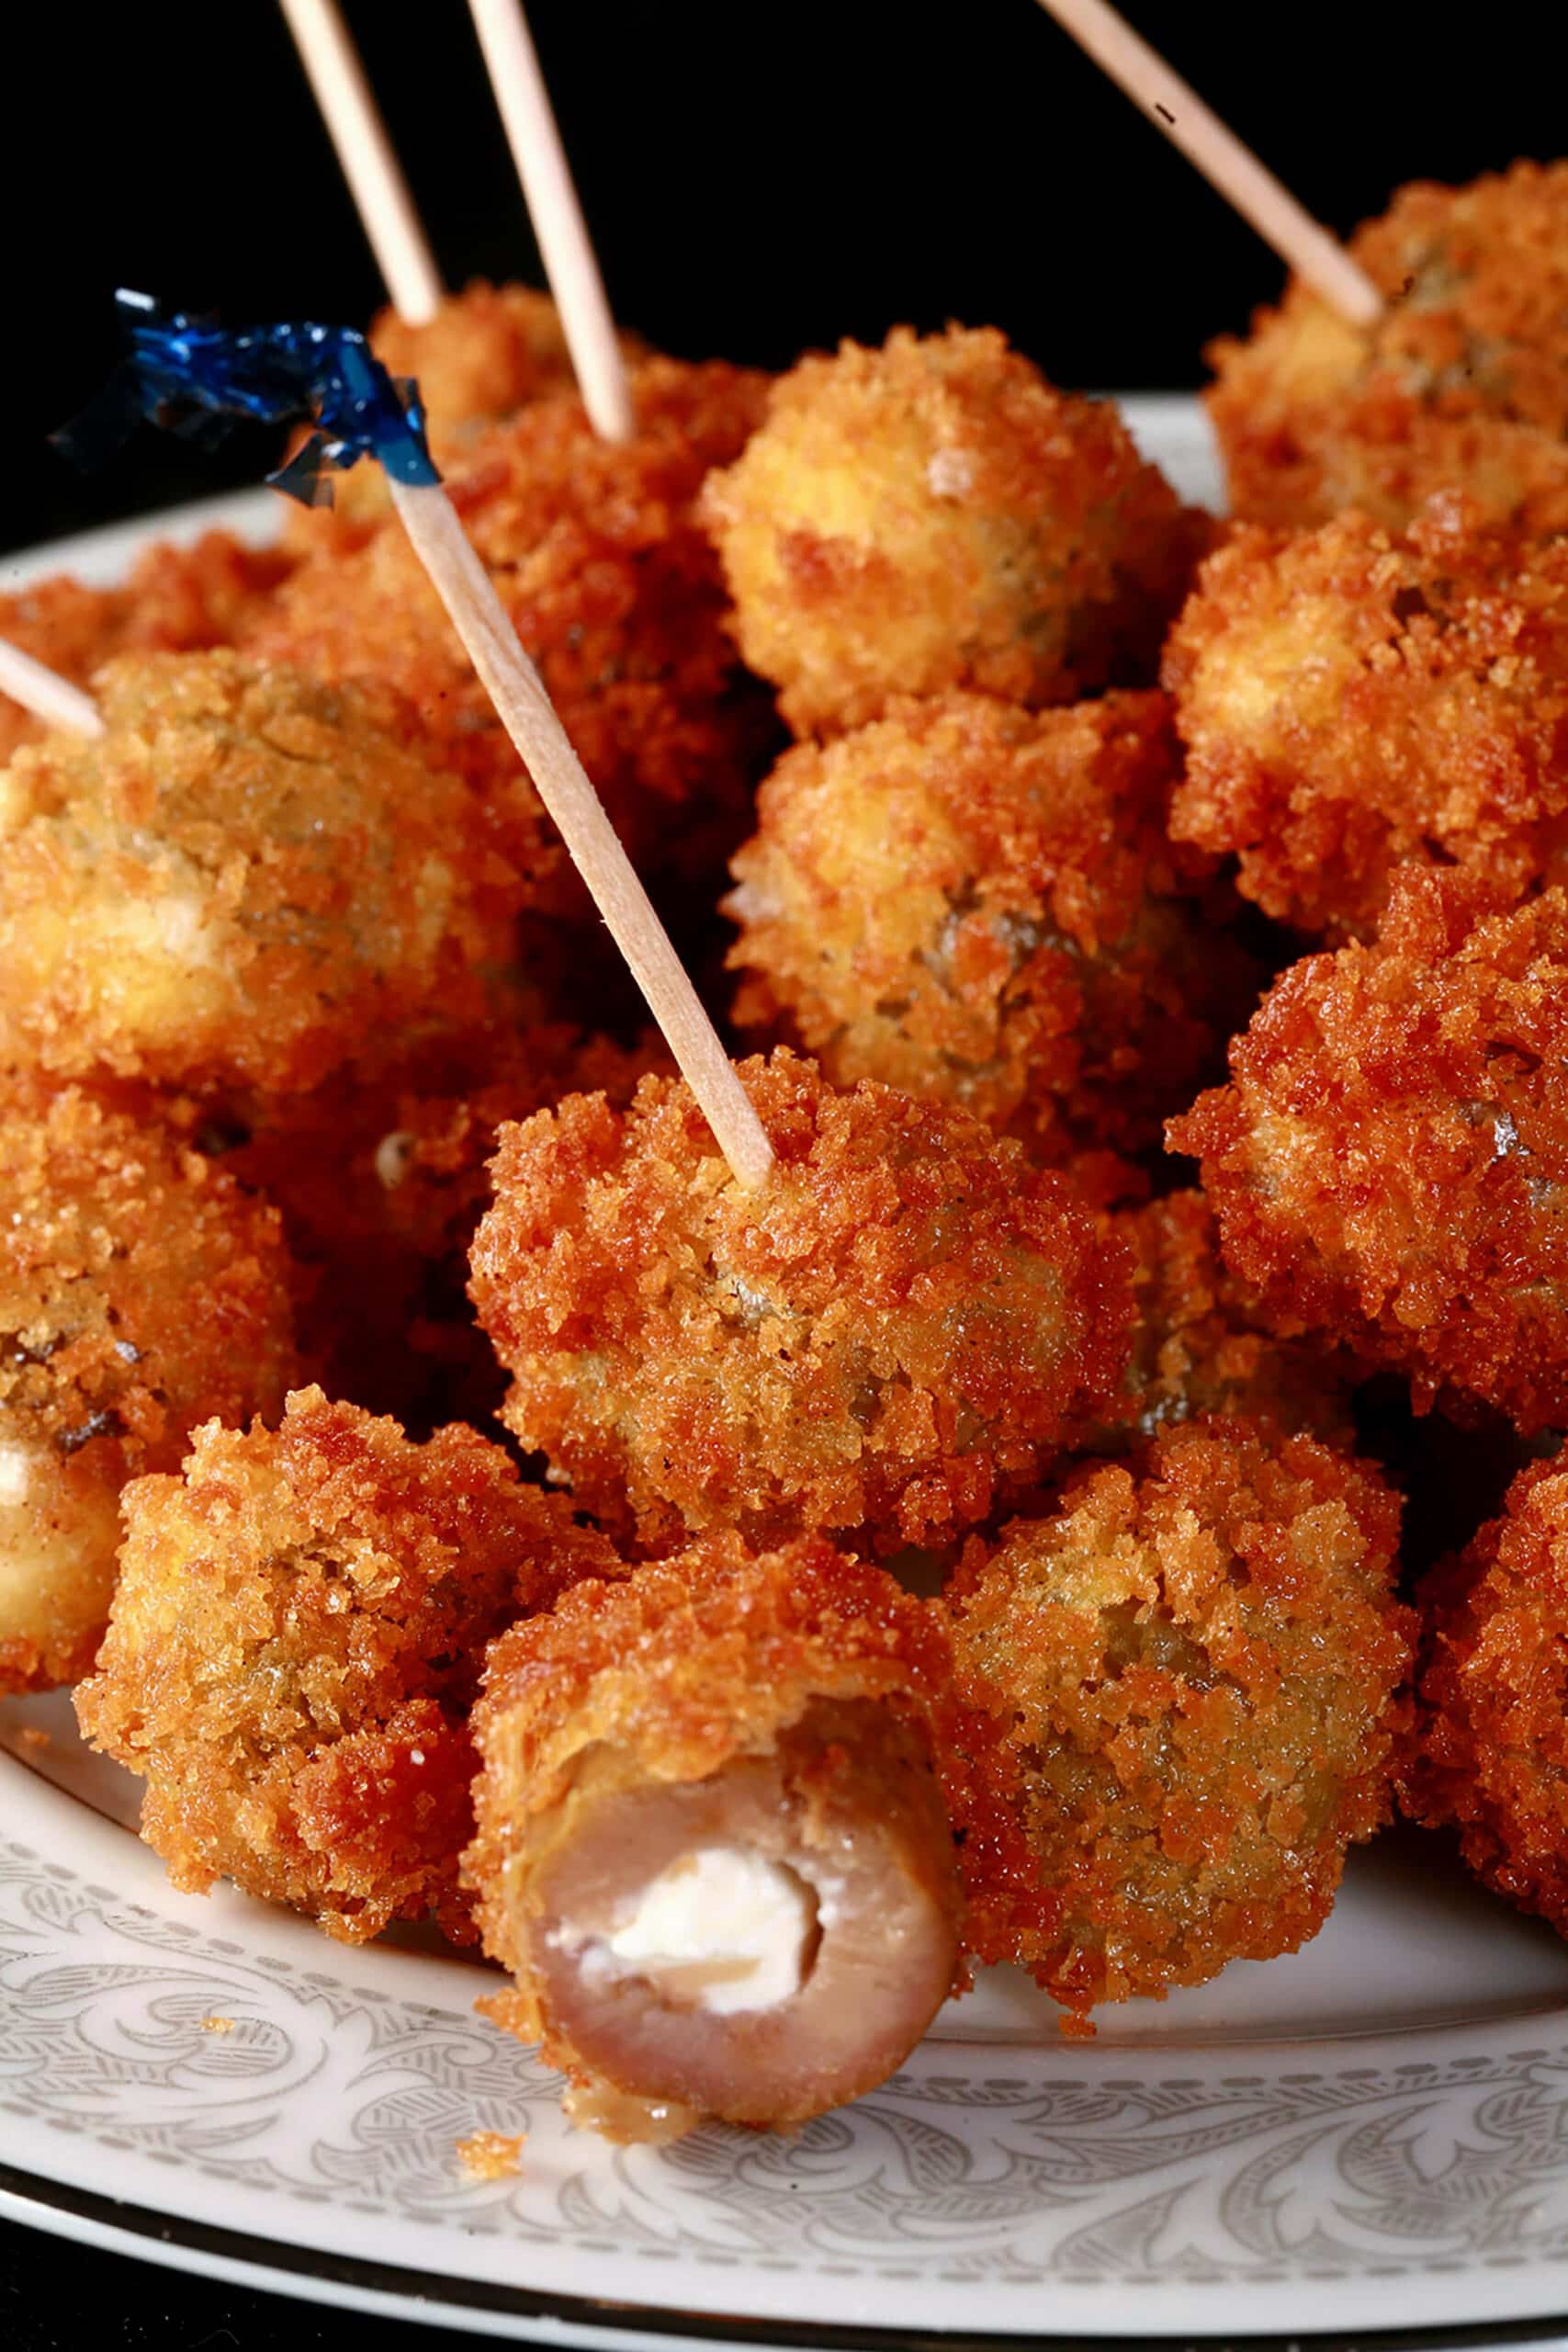 A pile of breaded deep fried olives on a plate. One is broken open to show it’s stuffed with a garlic cheese mixture.